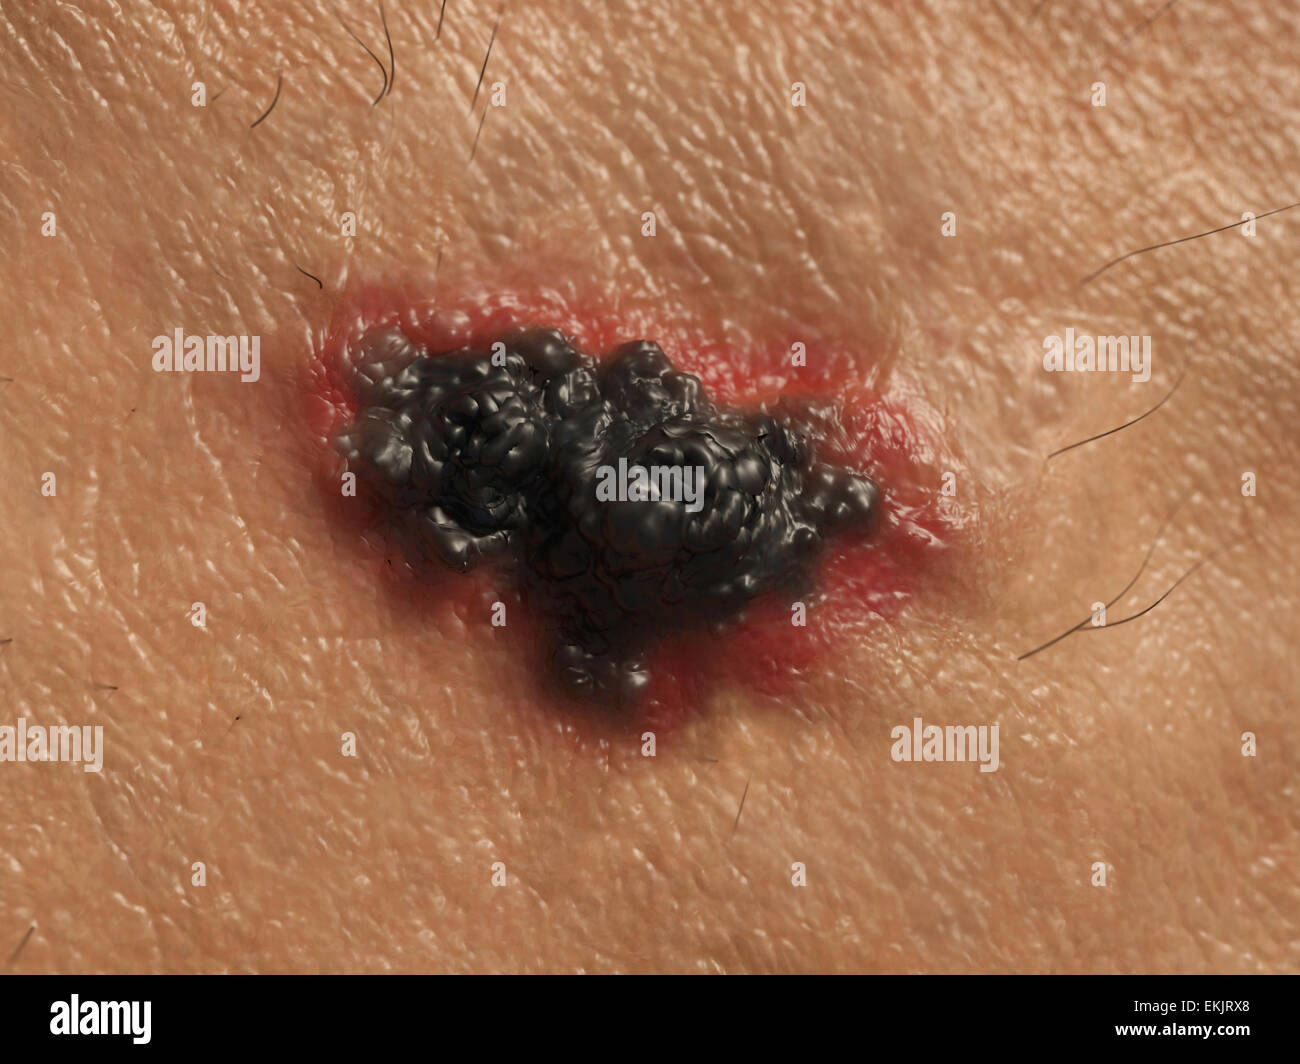 How do you find pictures of abnormal skin moles?